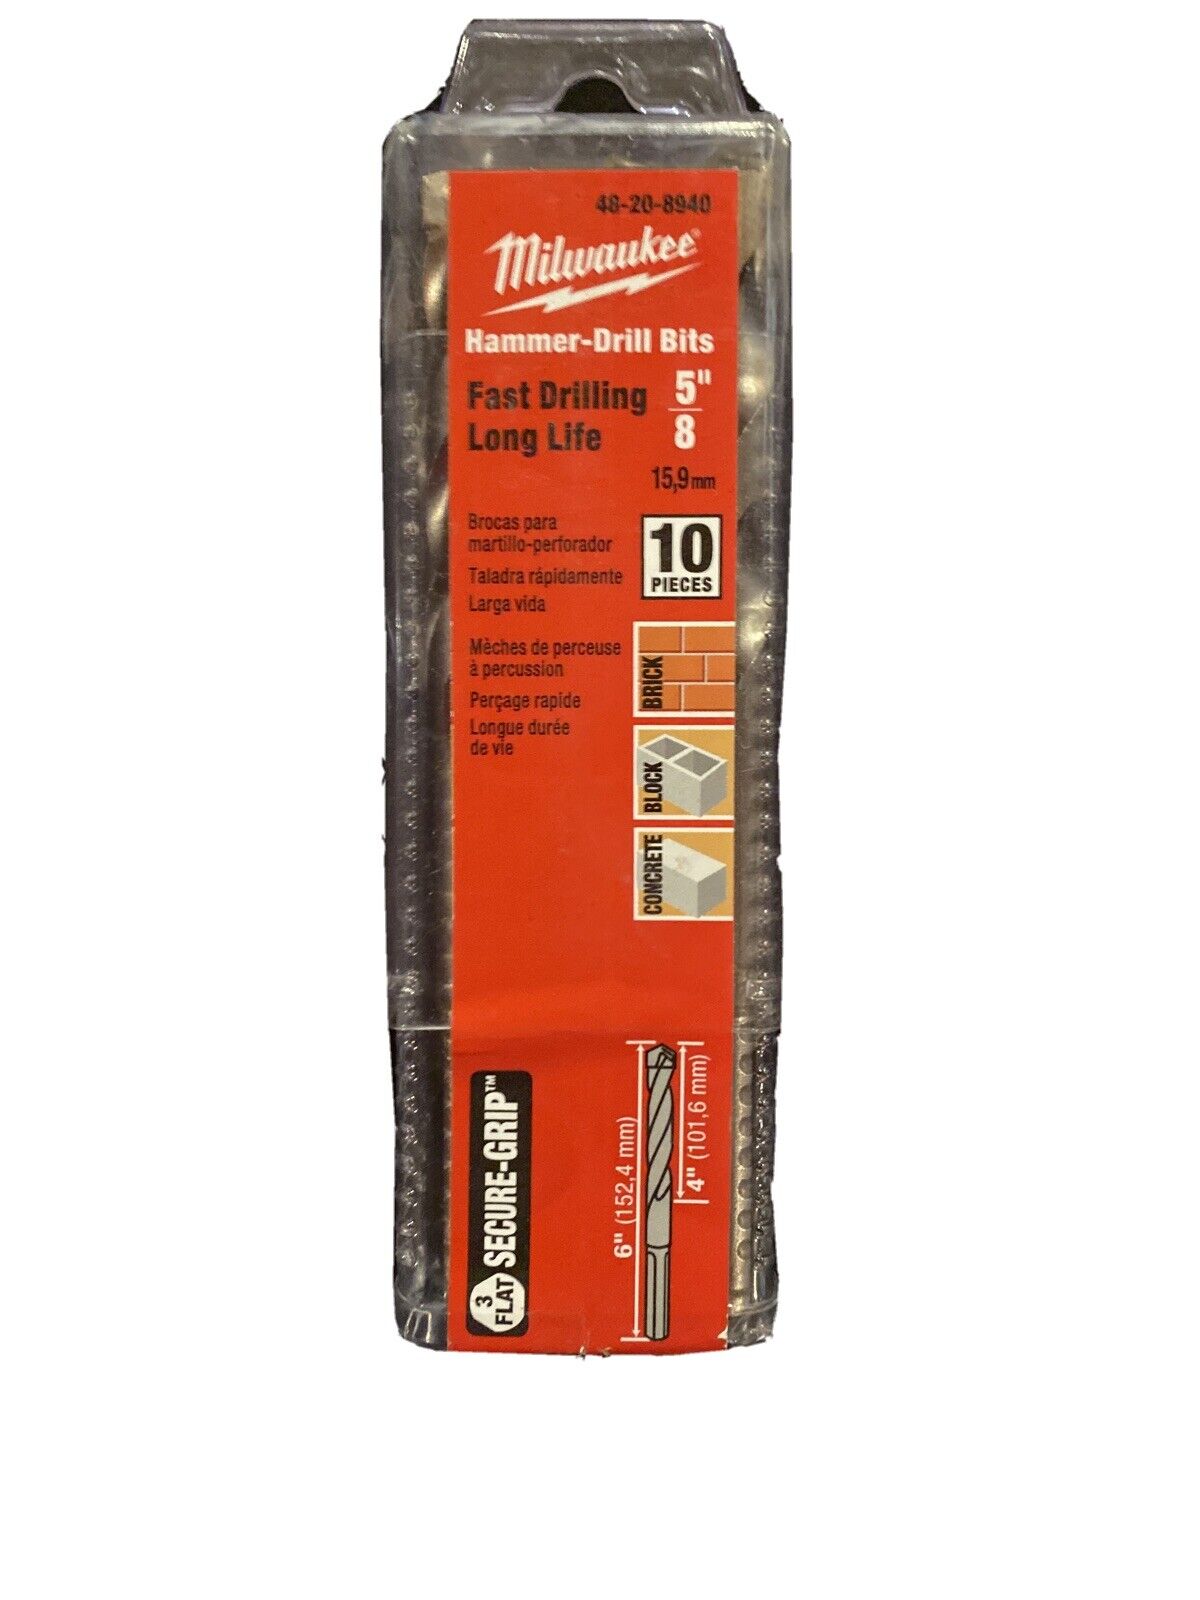 Milwaukee 48-20-8940 Hammer Drill Bits 5/8” X 4 X 6 In (10 Pc ) Germany